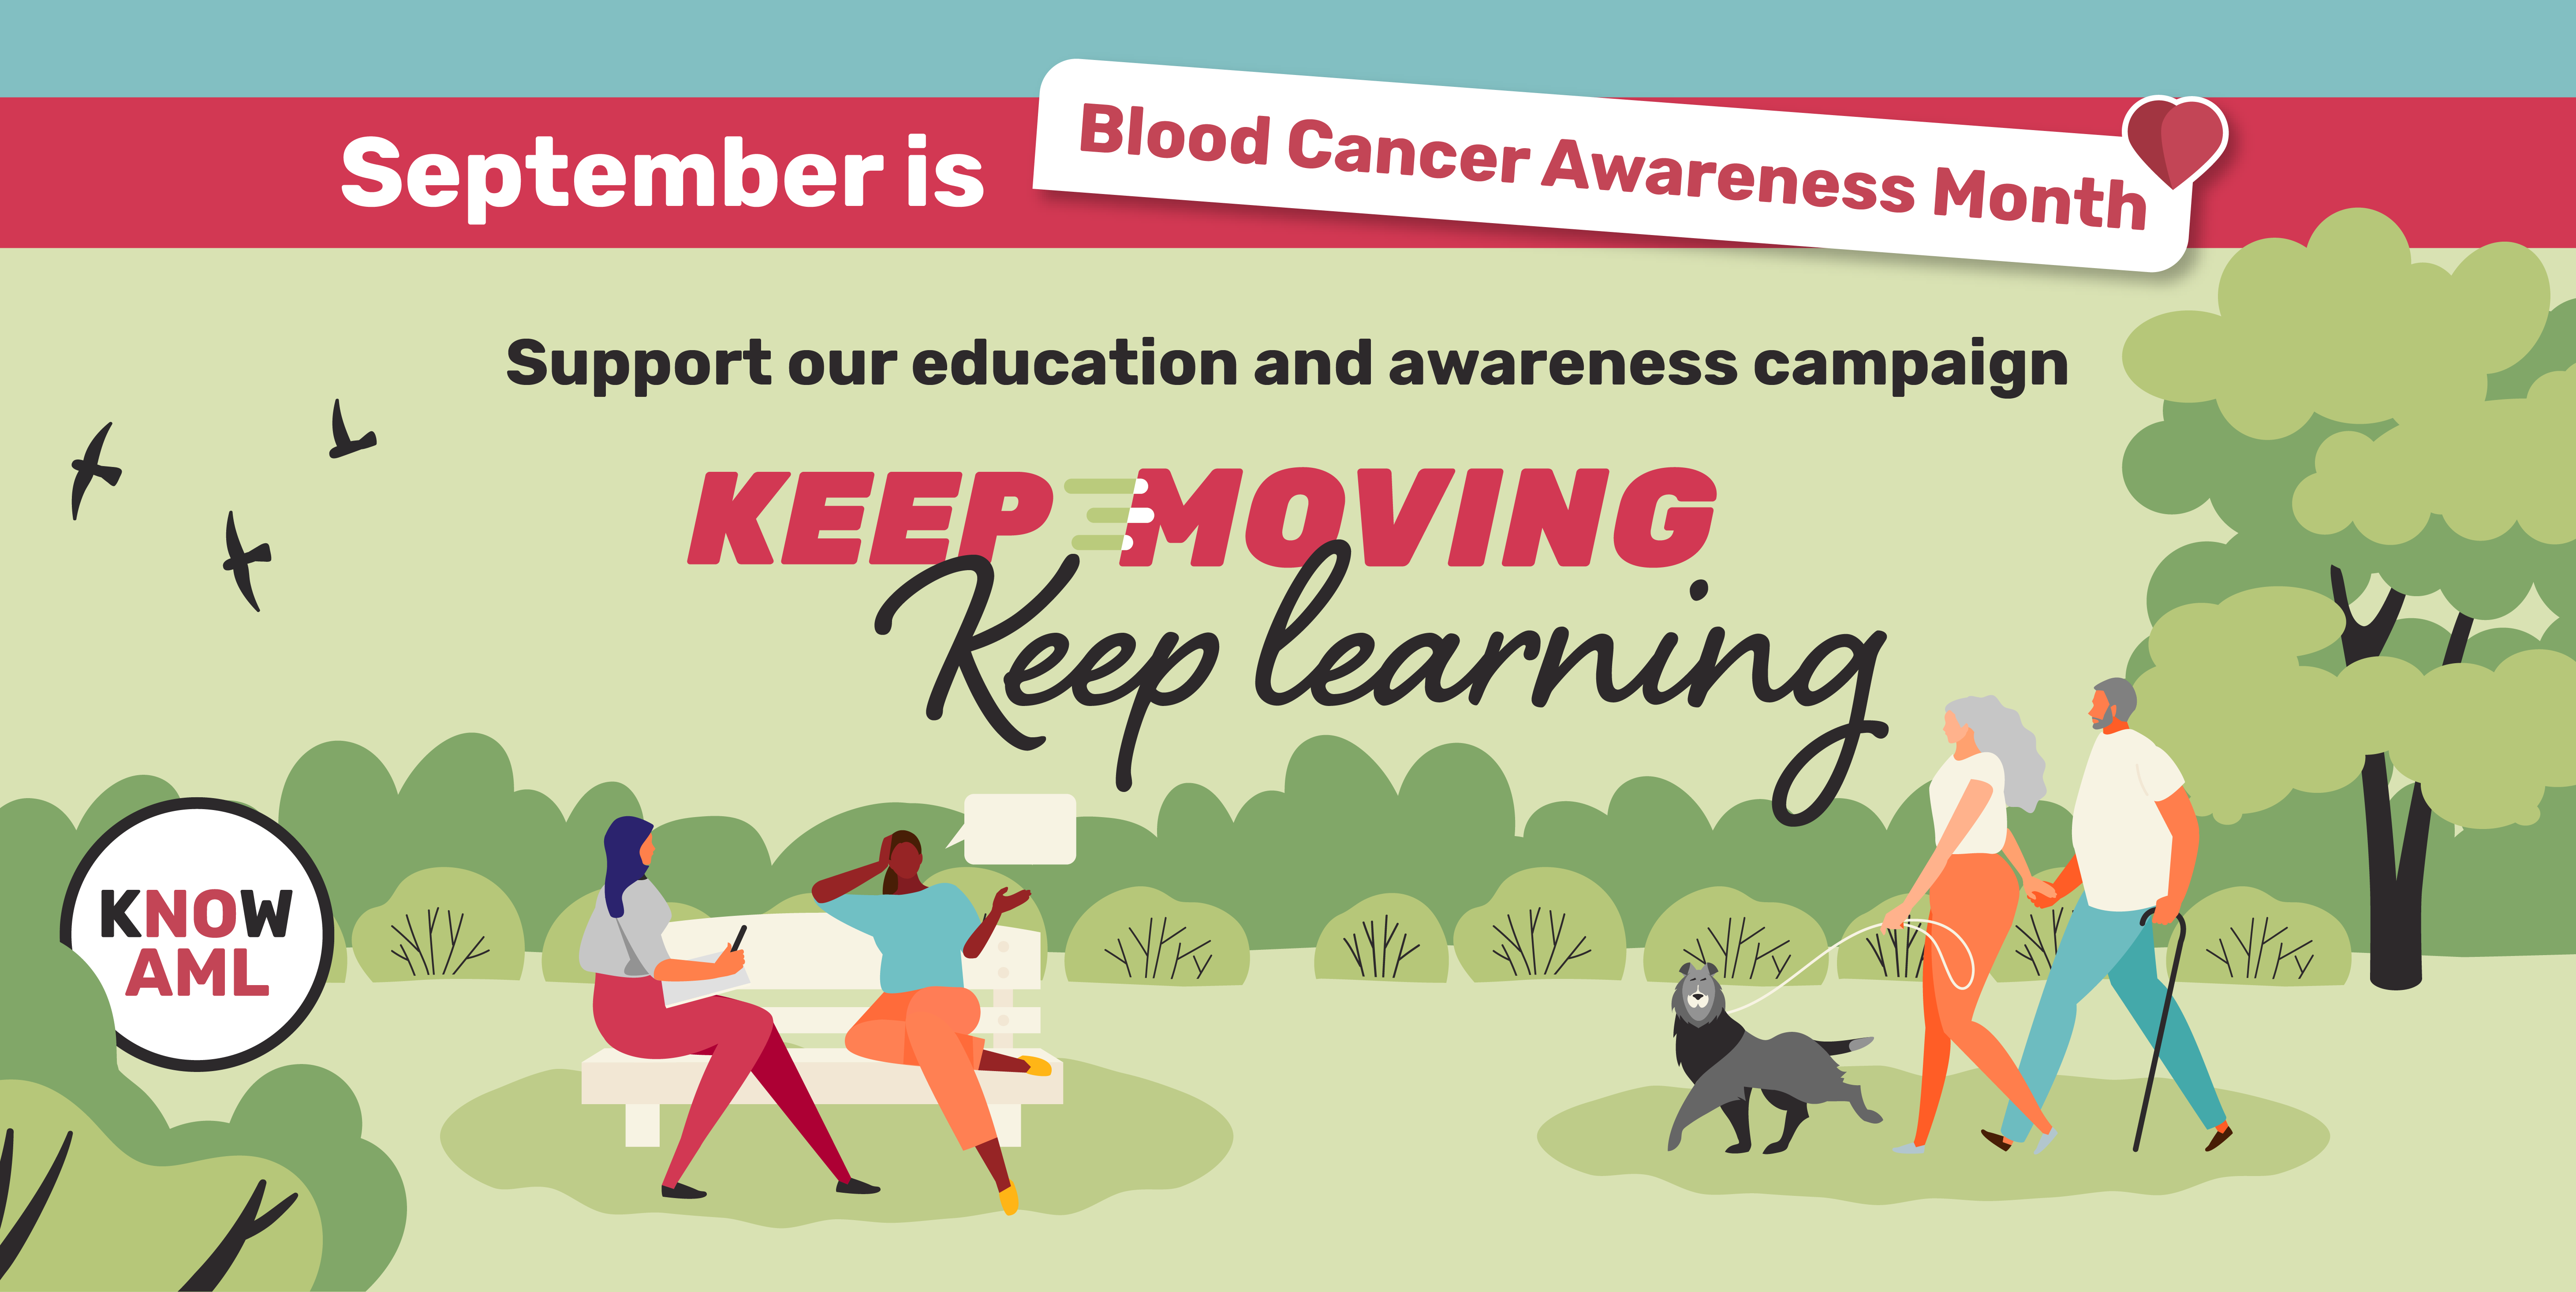 Support our educatinal and awareness campaign: Keep moving, Keep learning